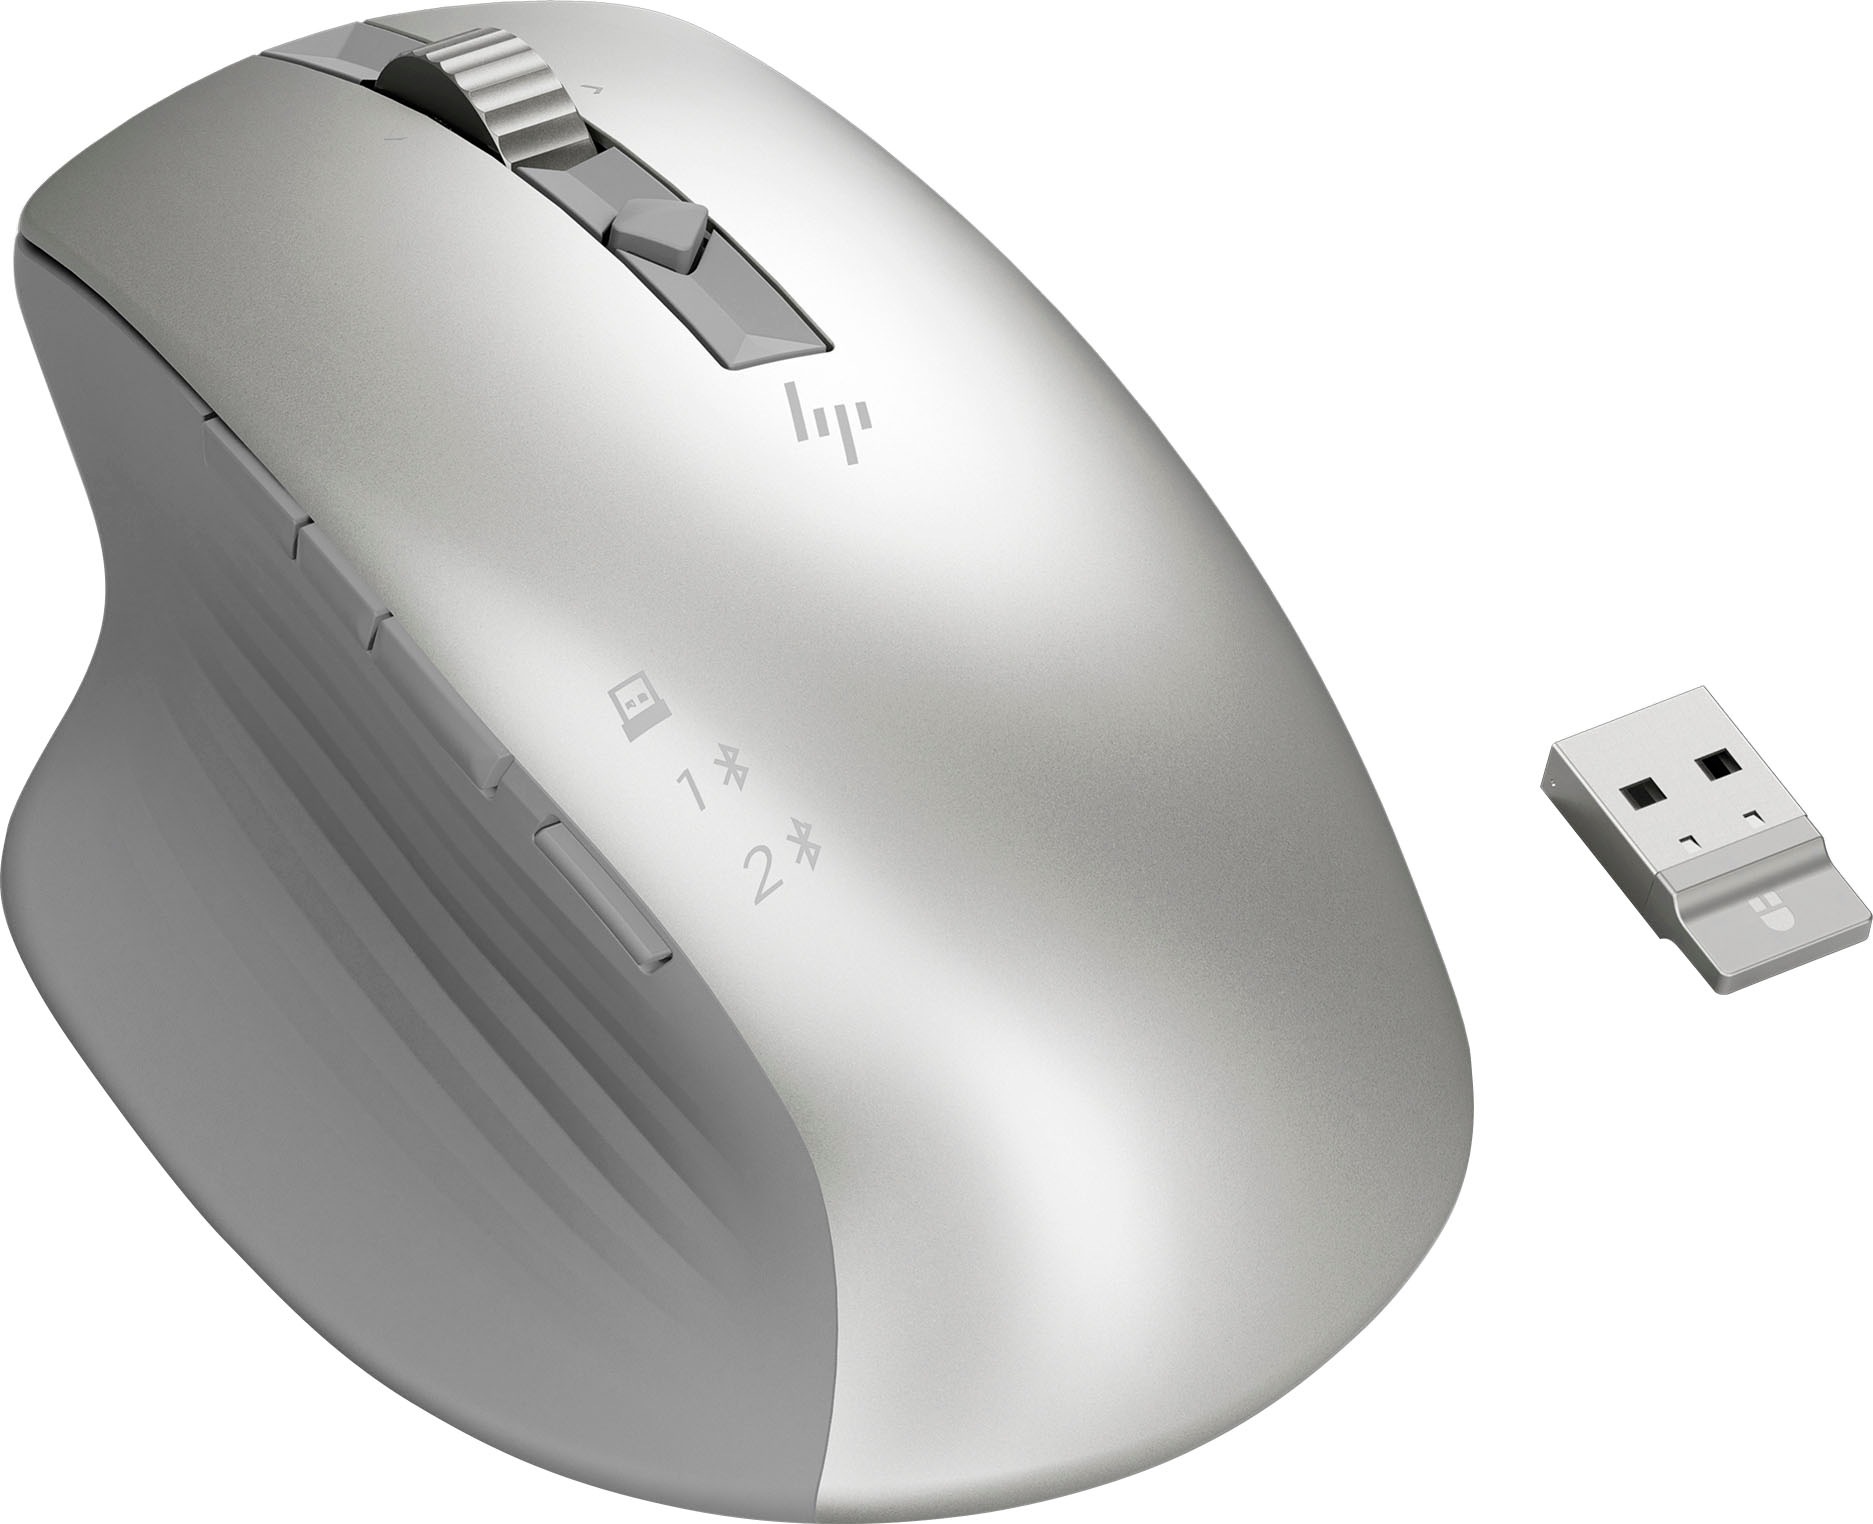 HP Maus »Silver 930 Creator Wireless Mouse«, Bluetooth